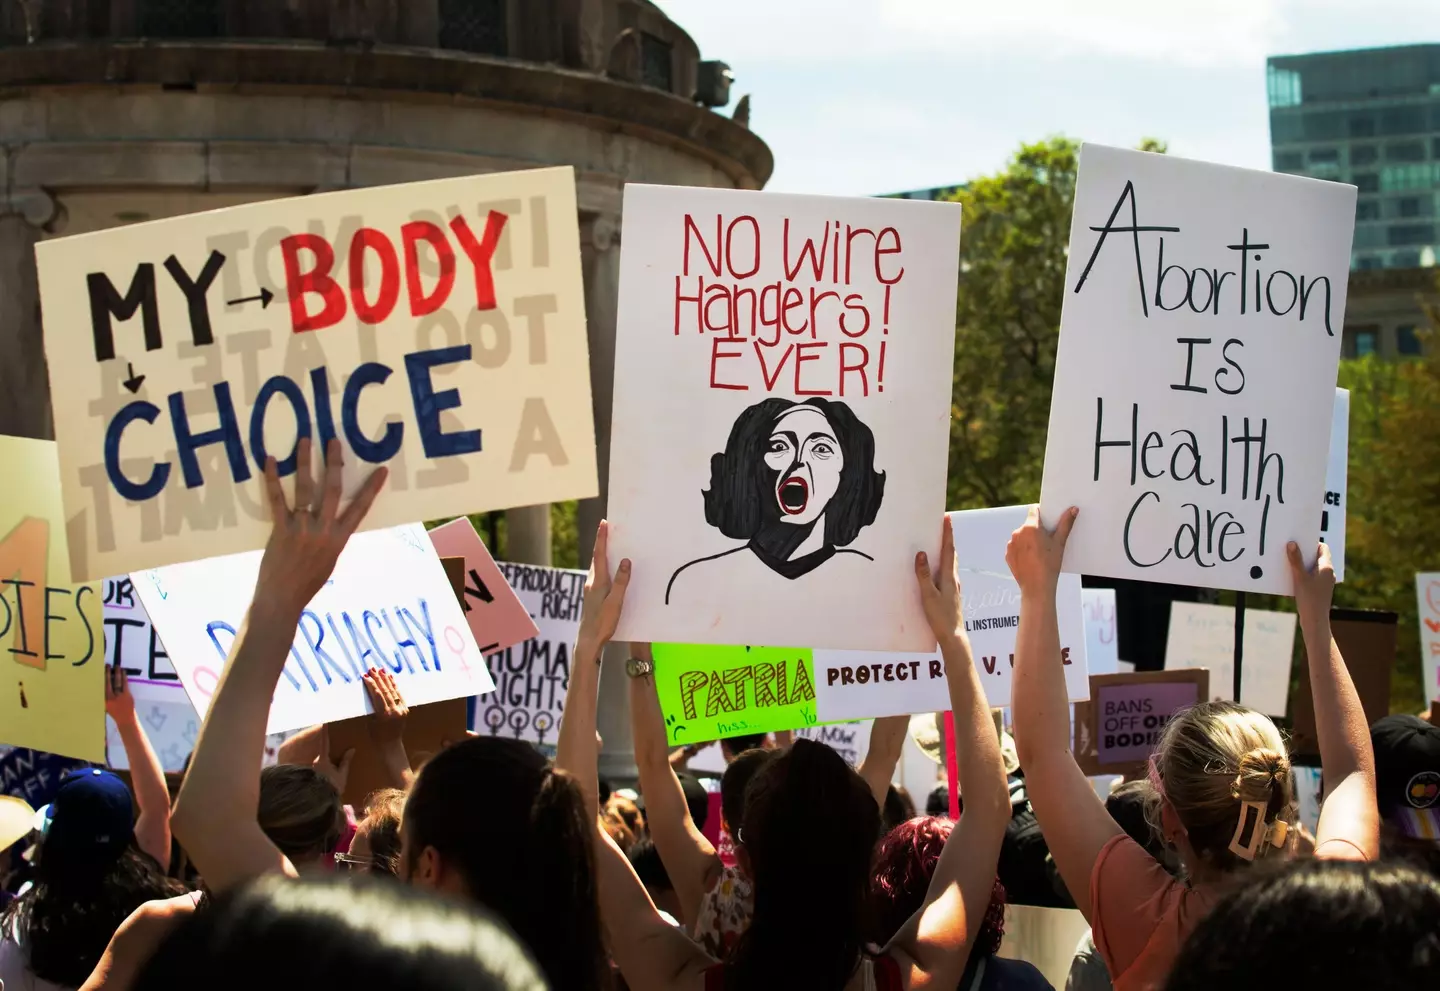 Women are now campaigning for abortion rights.